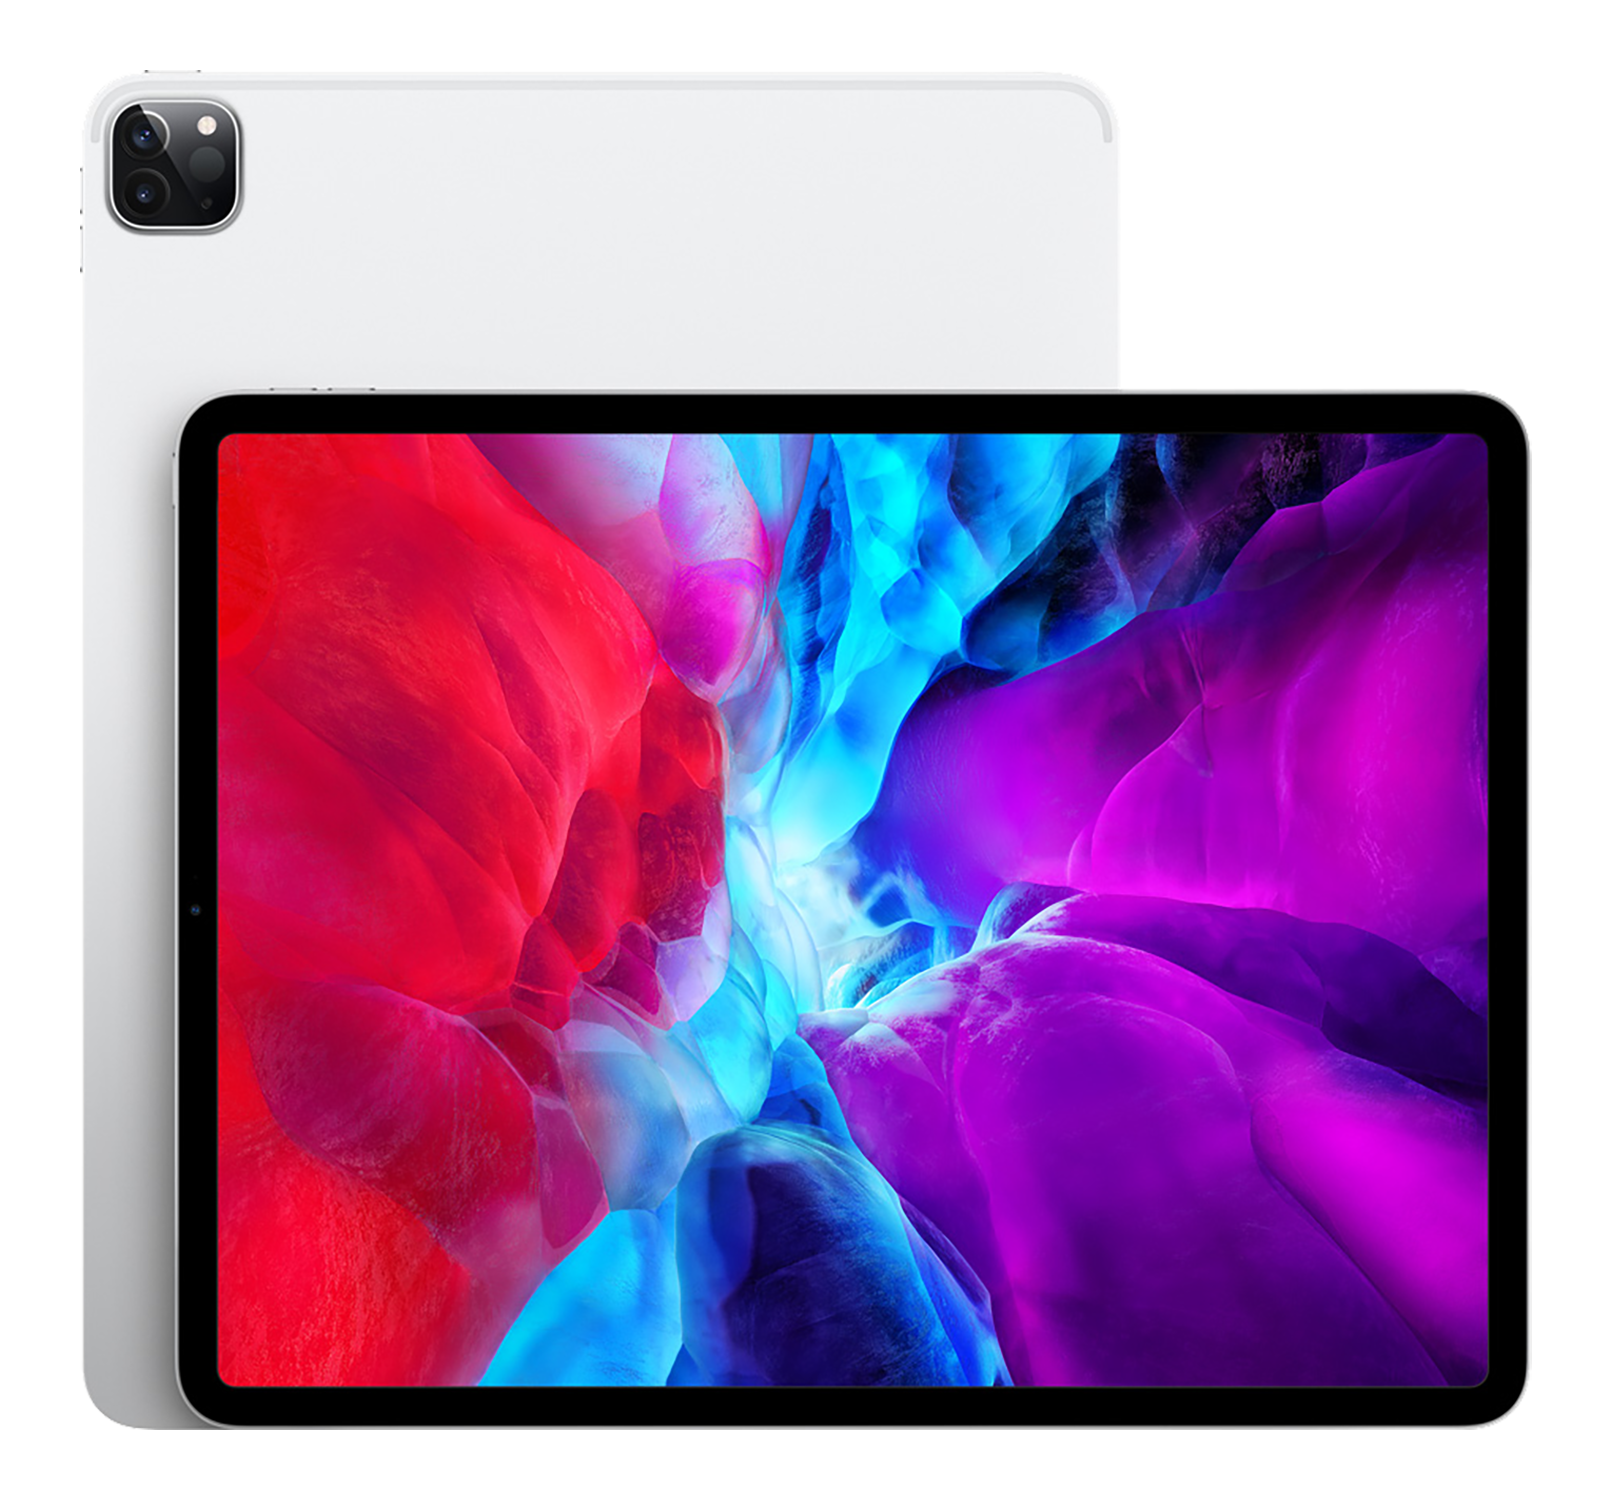 tongue Interesting Revival Best Price on 11" iPad Pro (512GB, Silver, Wi-Fi + Cellular) MXF02LL/A